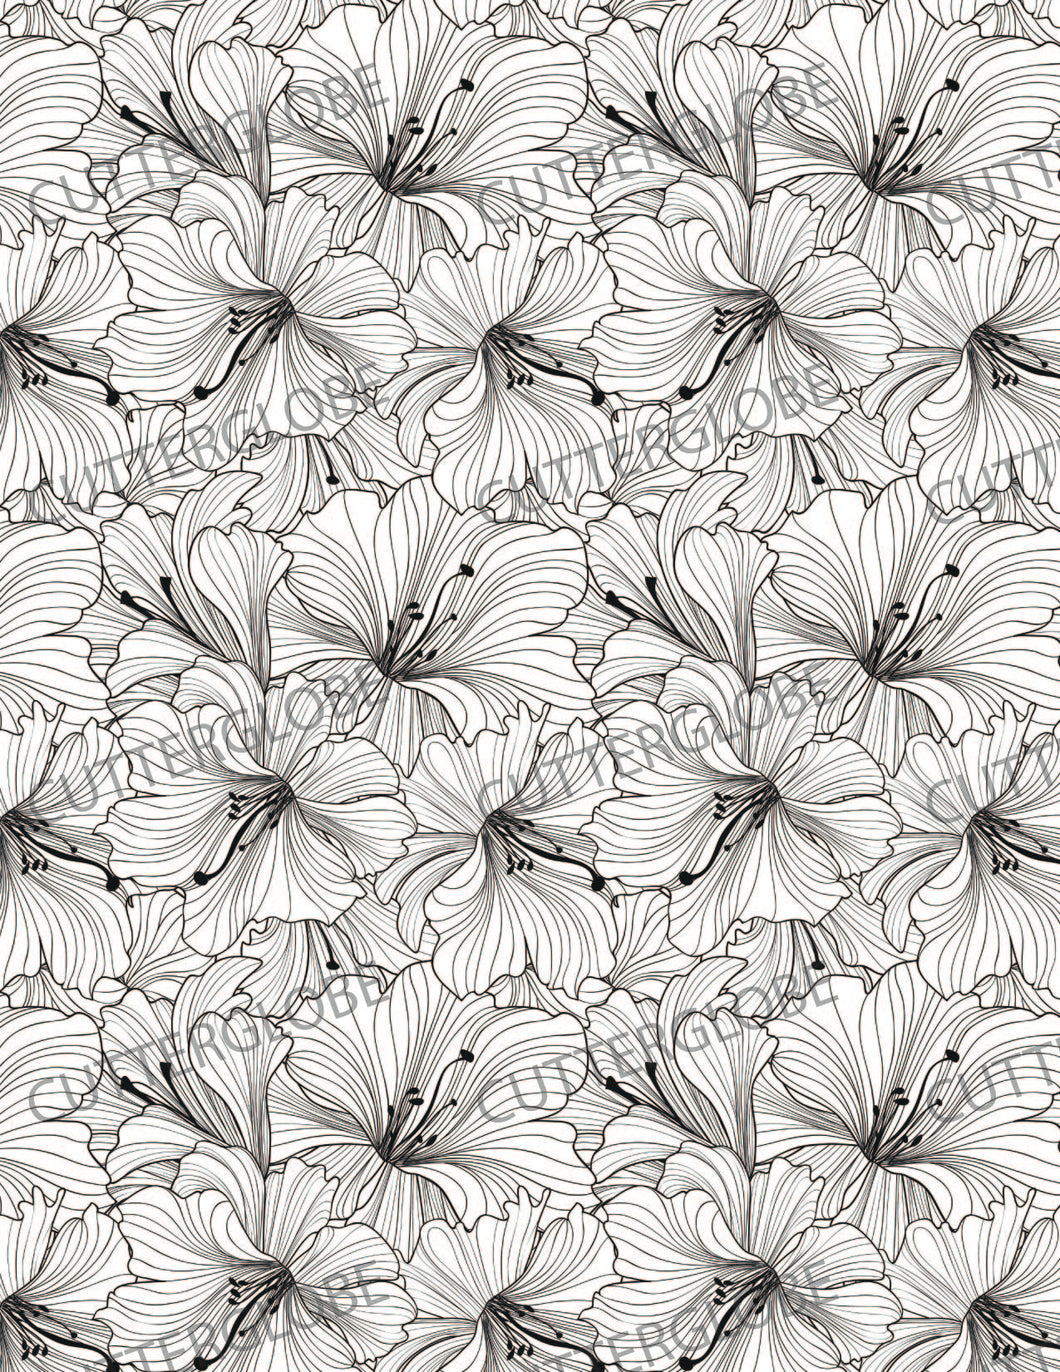 Floral 050 Transfer (BW Overlapping Flowy)